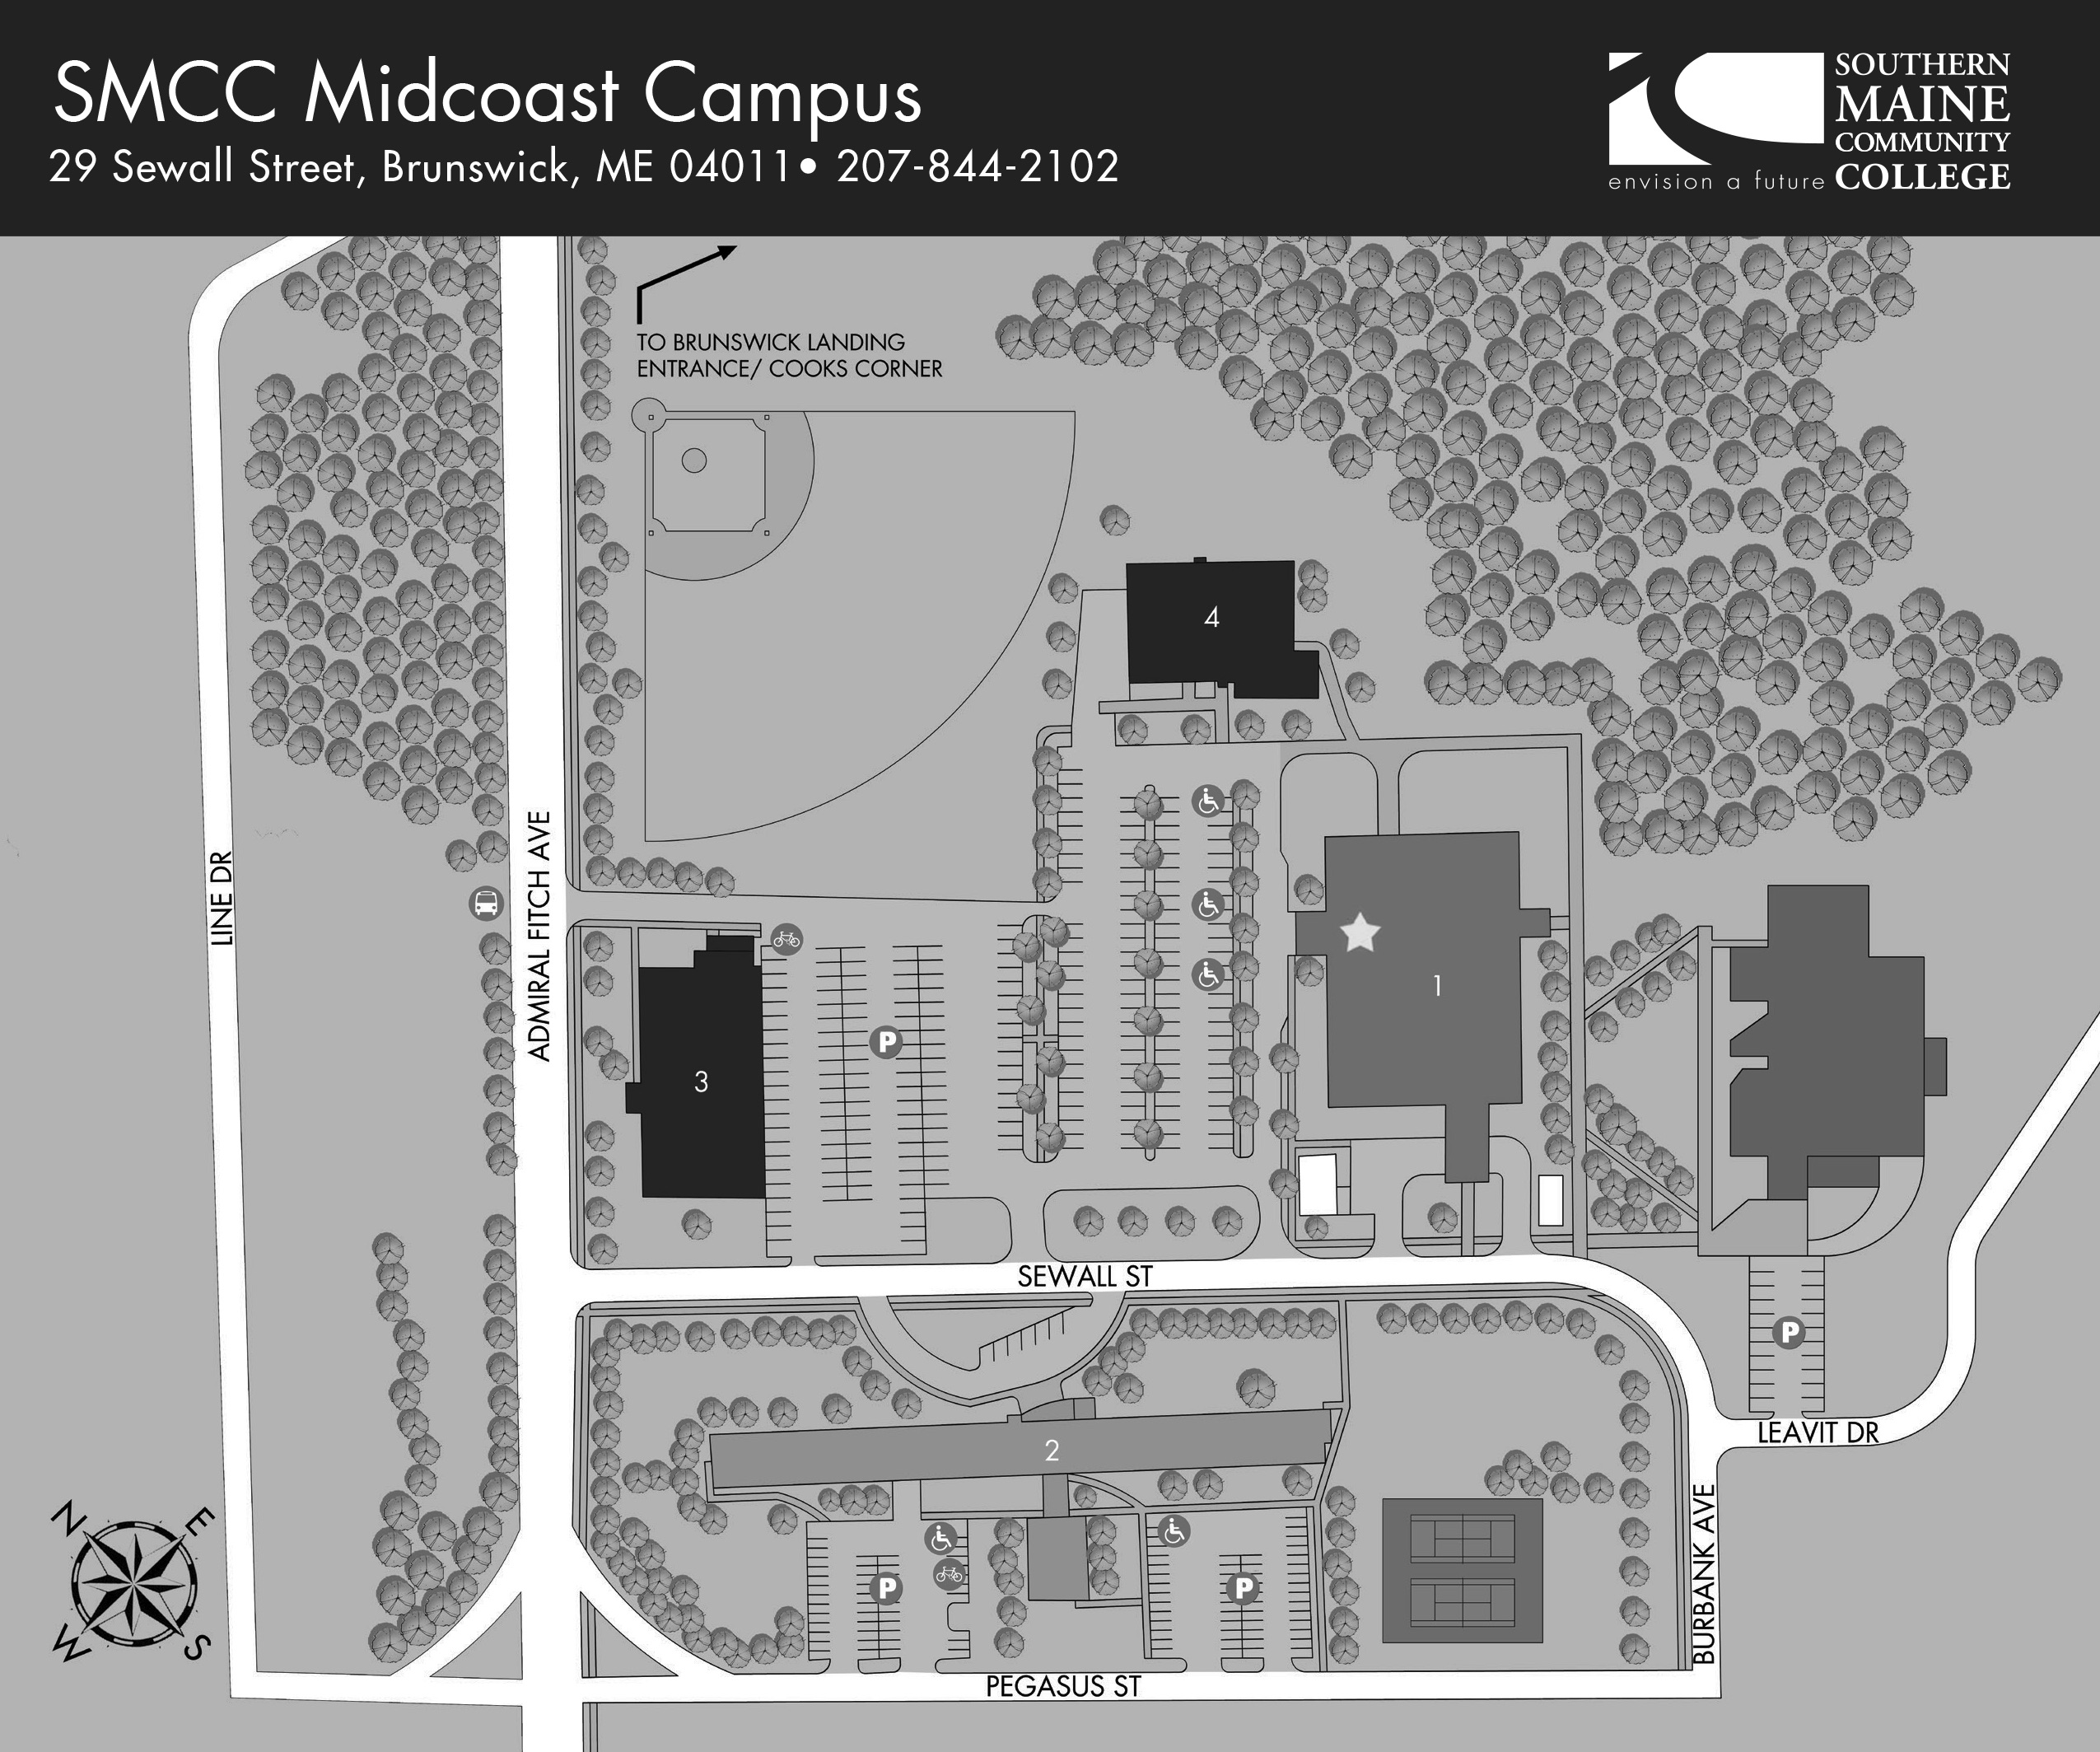 come-visit-the-midcoast-campus-the-smcc-beacon